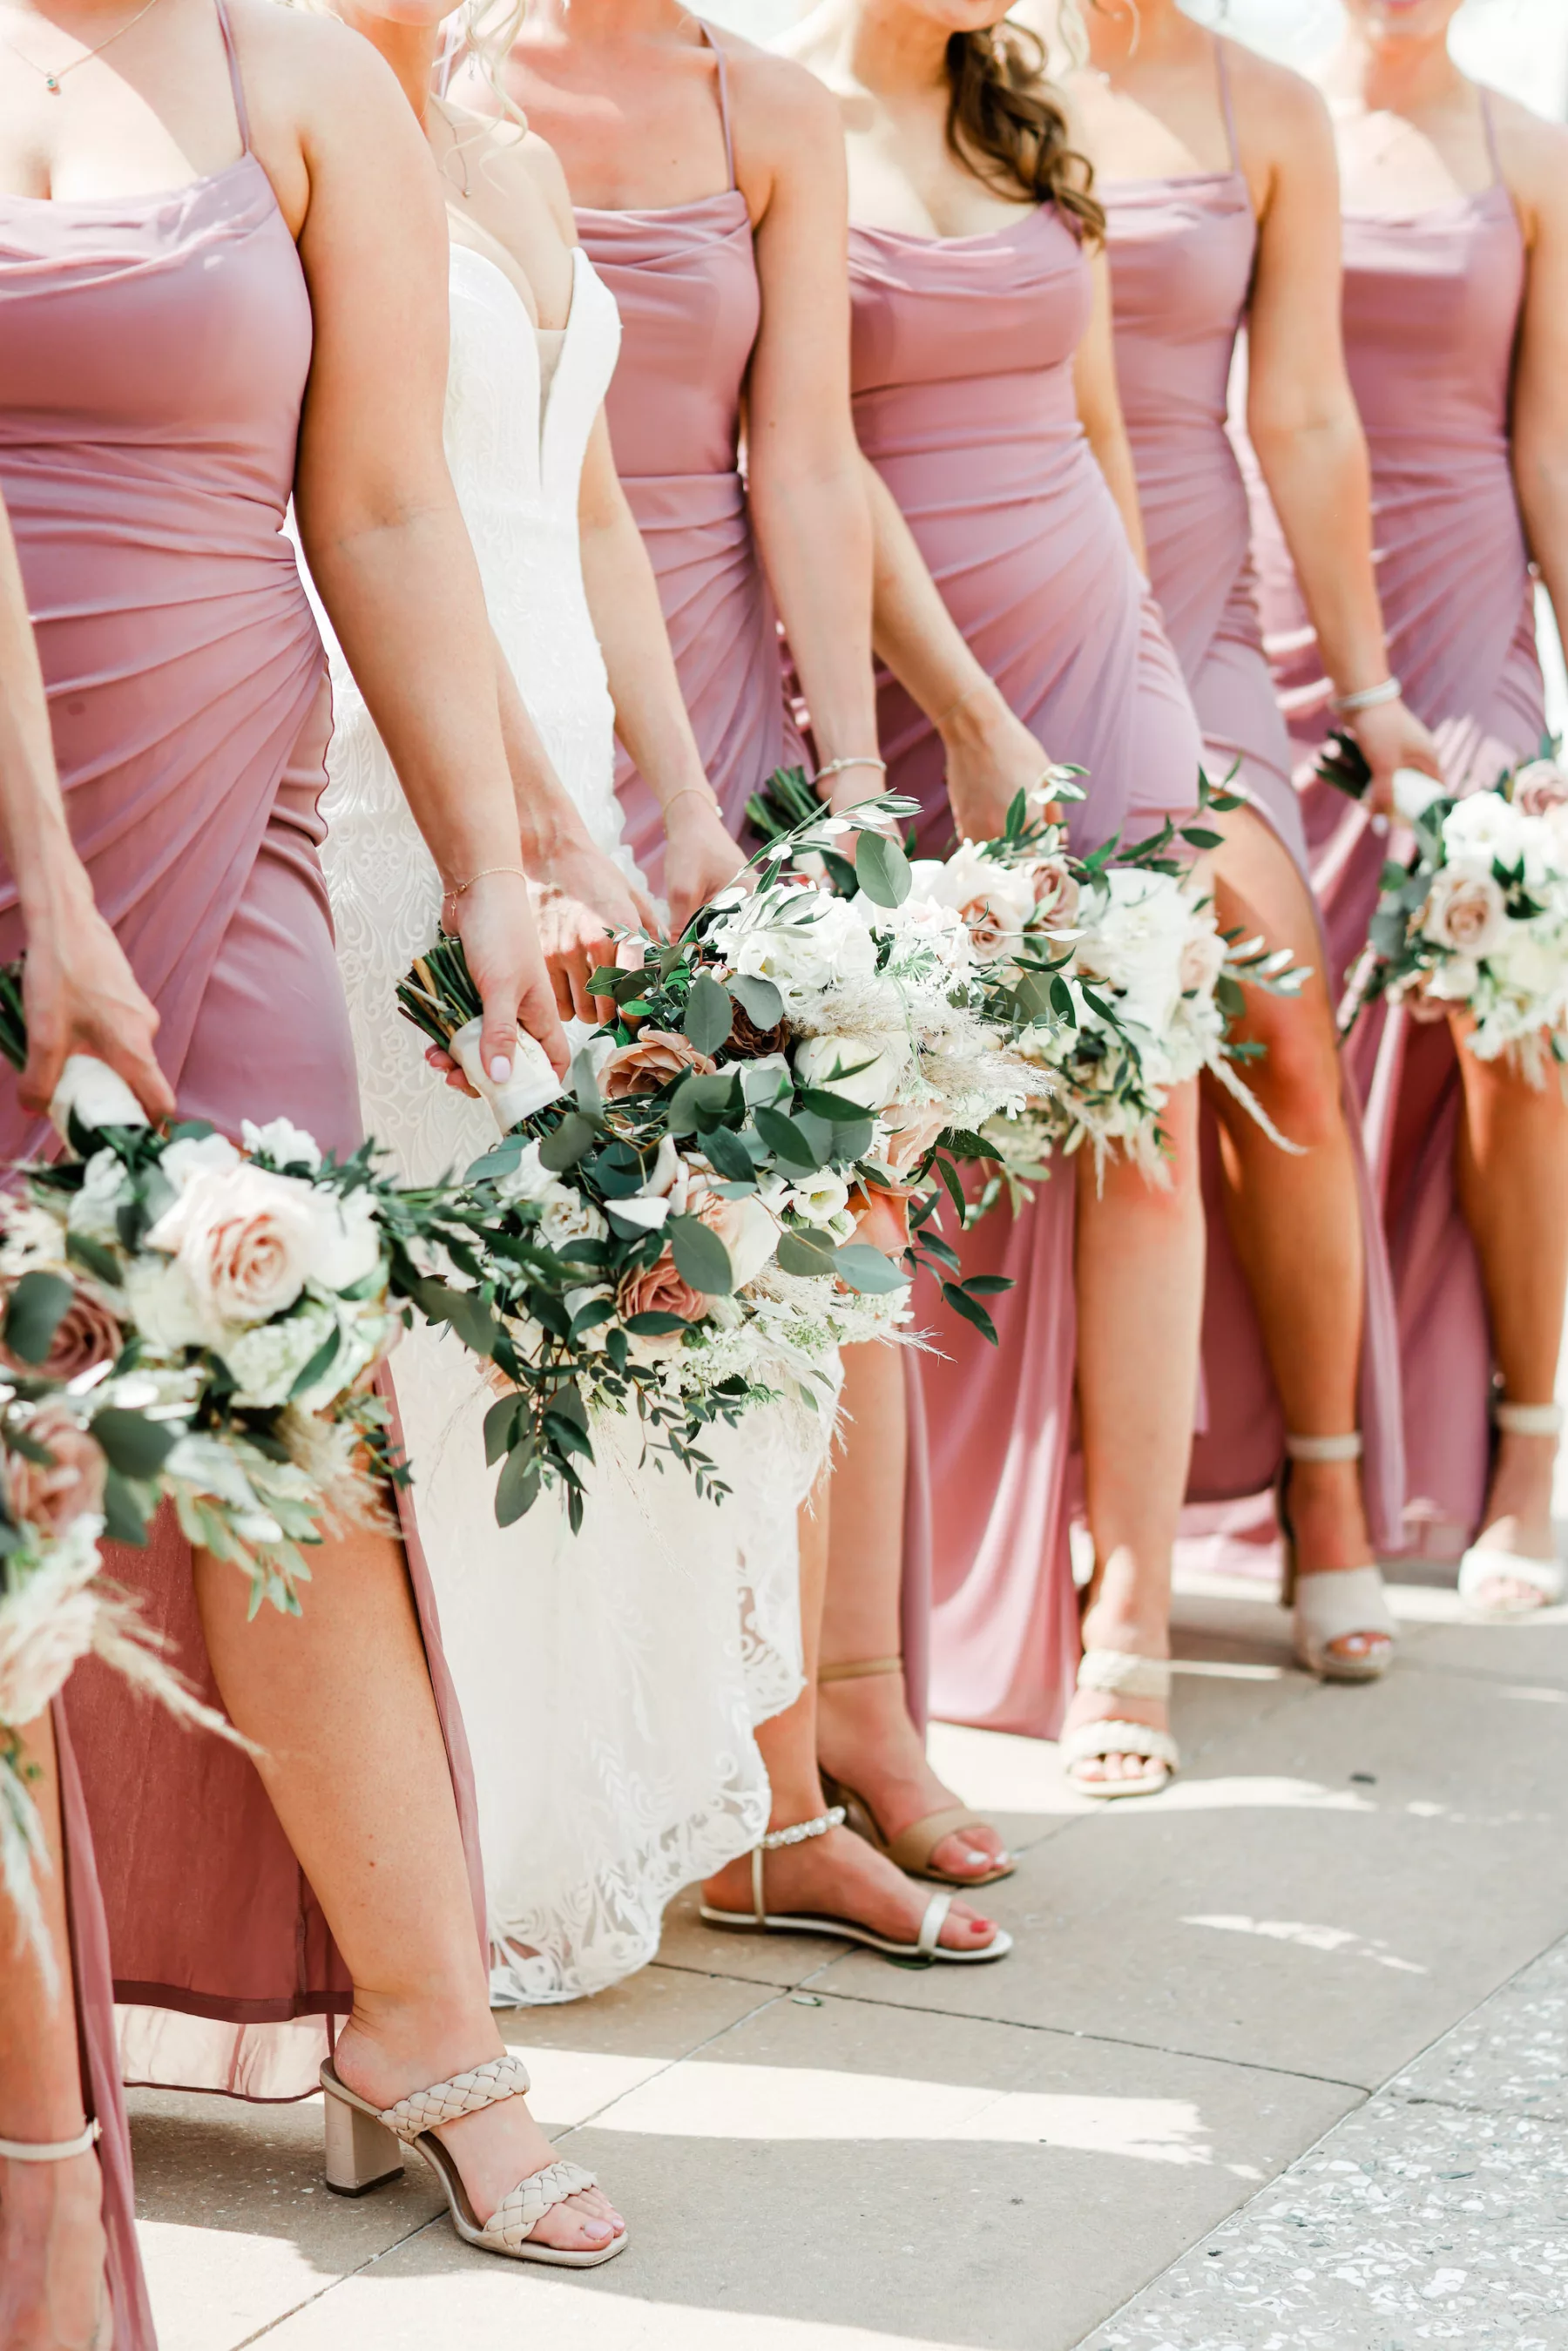 Matching Mauve Bridesmaids Dresses Inspiration | Boho Wedding Bouquet Ideas with Pink, Purple, and White Roses, Pampas Grass, and Greenery